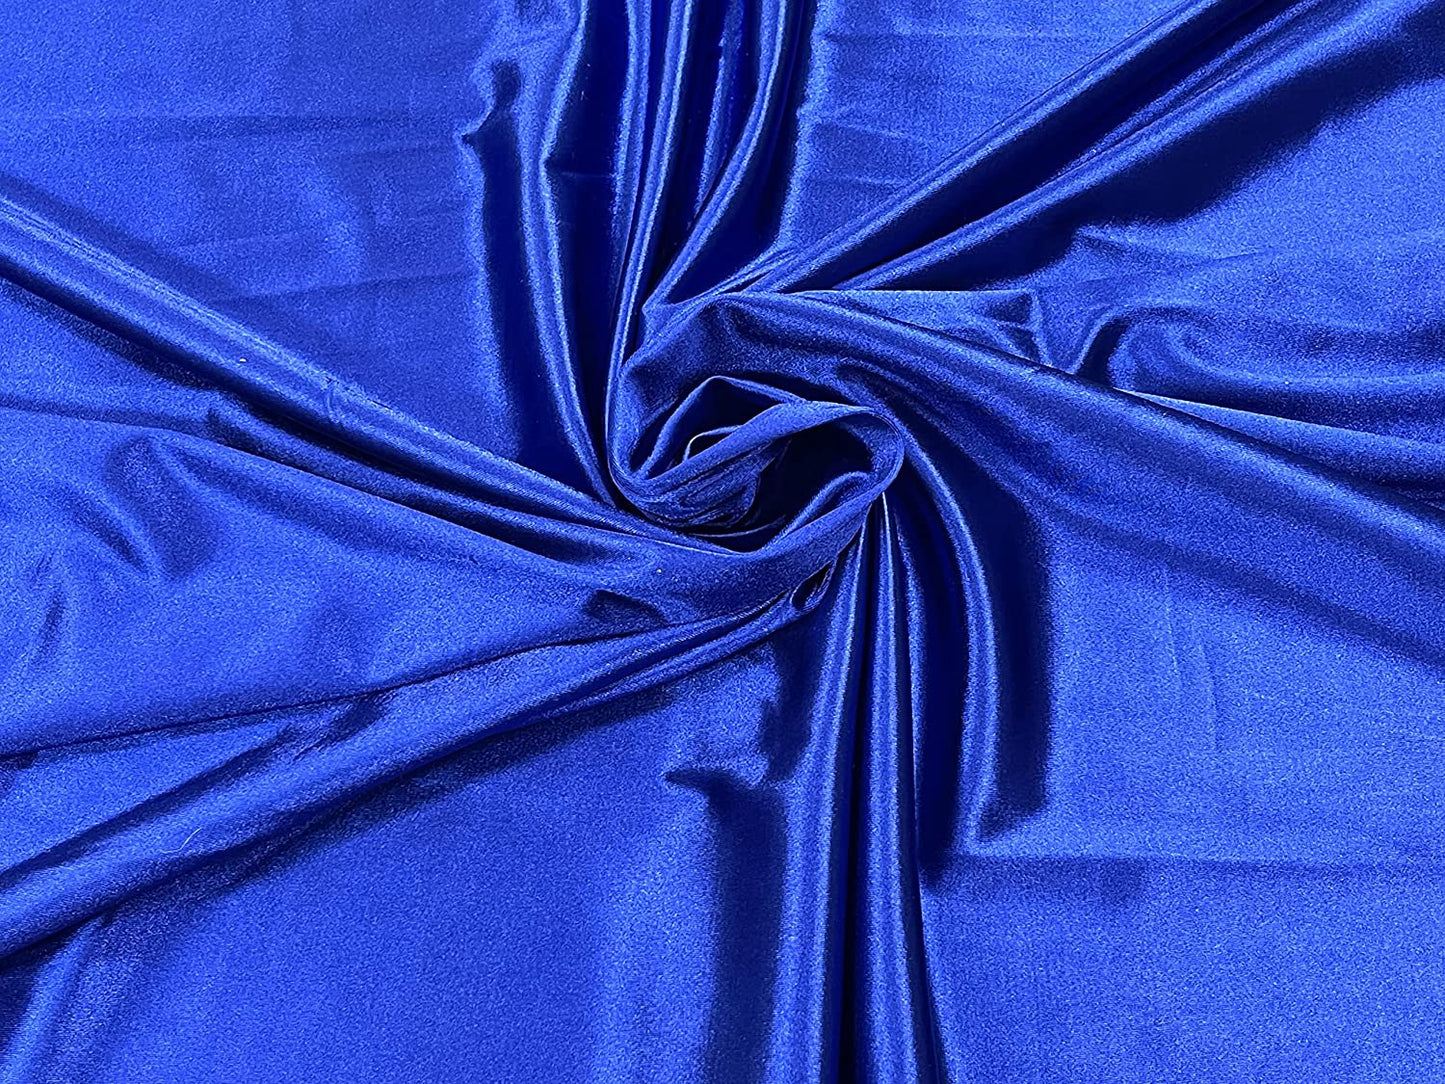 Deluxe Shiny Polyester Spandex Stretch Fabric (1 Yard, Royal Blue)